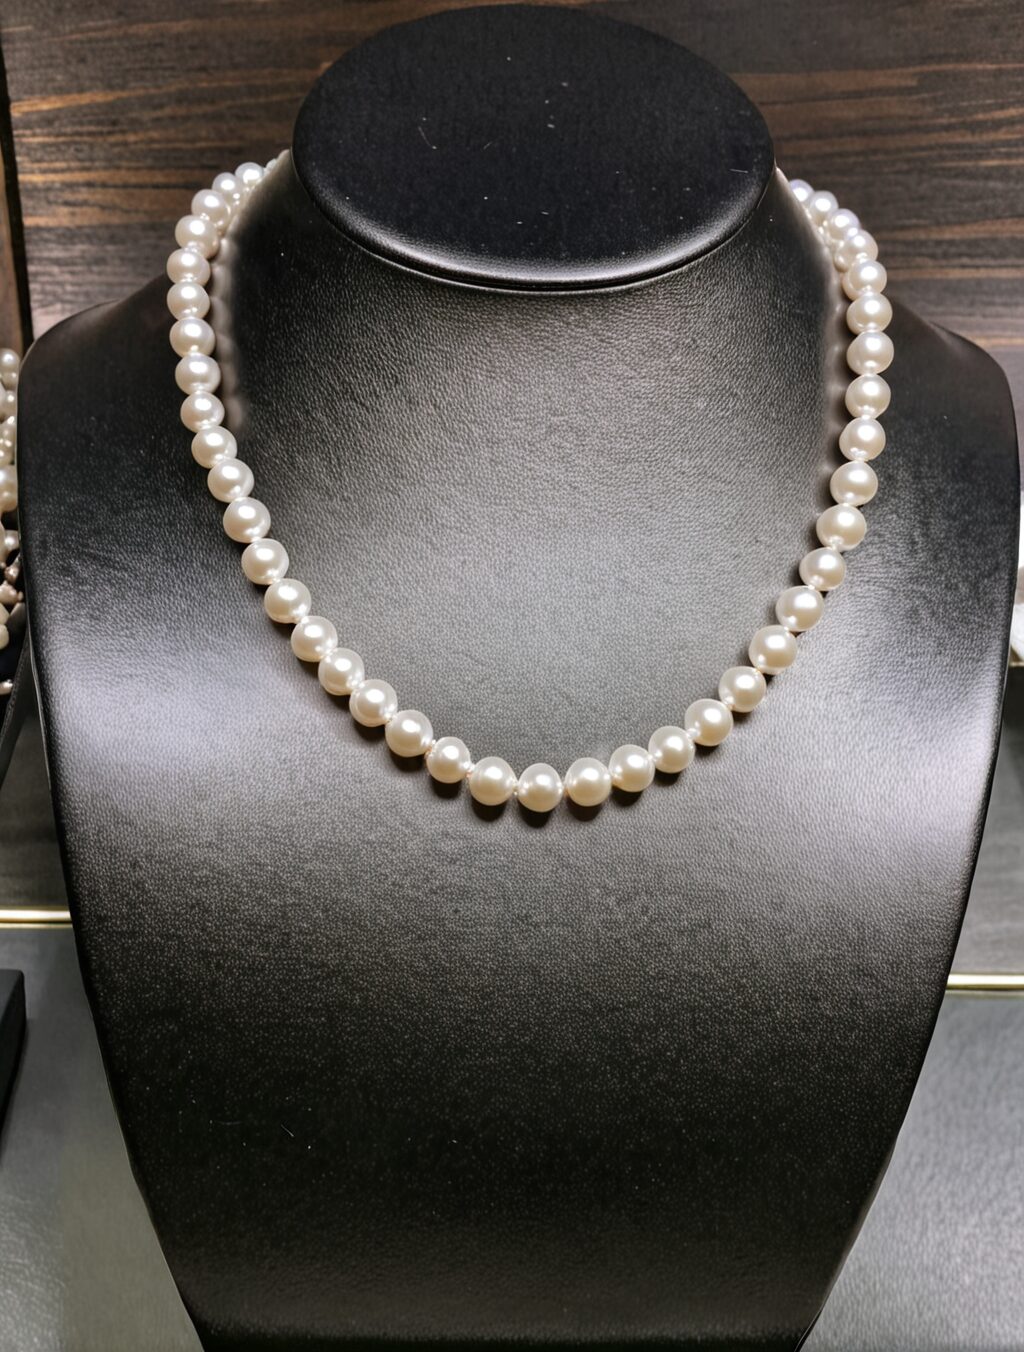 where to buy pearls in kyoto japan